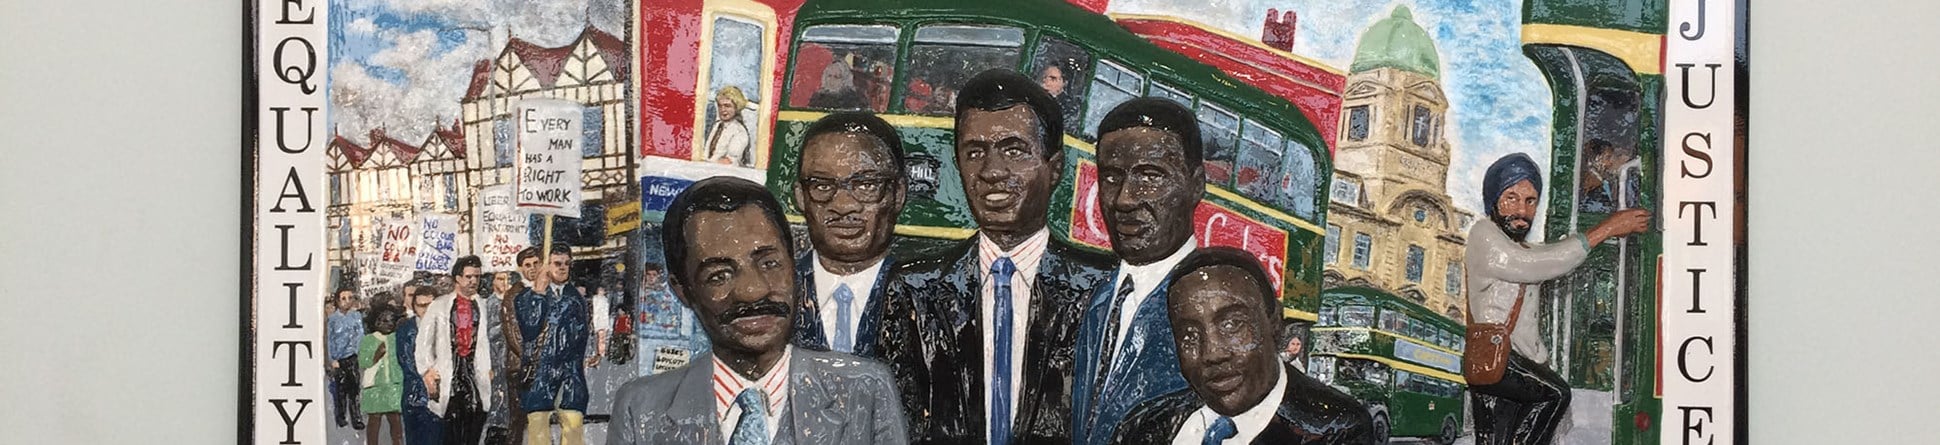 Plaque reads 'The Bristol Bus Boycott 1963, Equality, Justice, the campaign against racial discrimination' with a picture of 5 coloured men and a double decker bus in the background